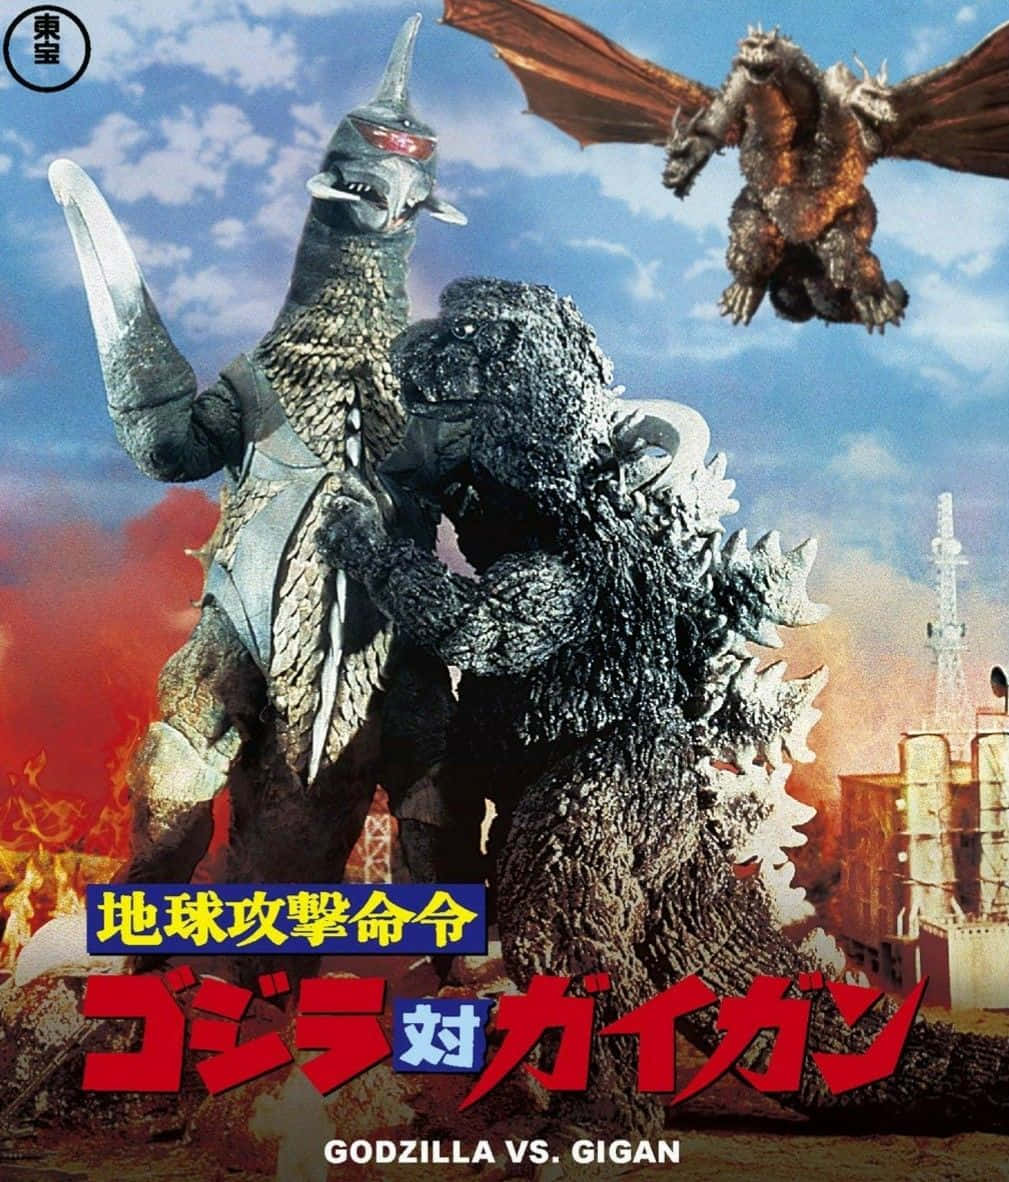 Godzilla and Gigan face off in an epic battle. Wallpaper